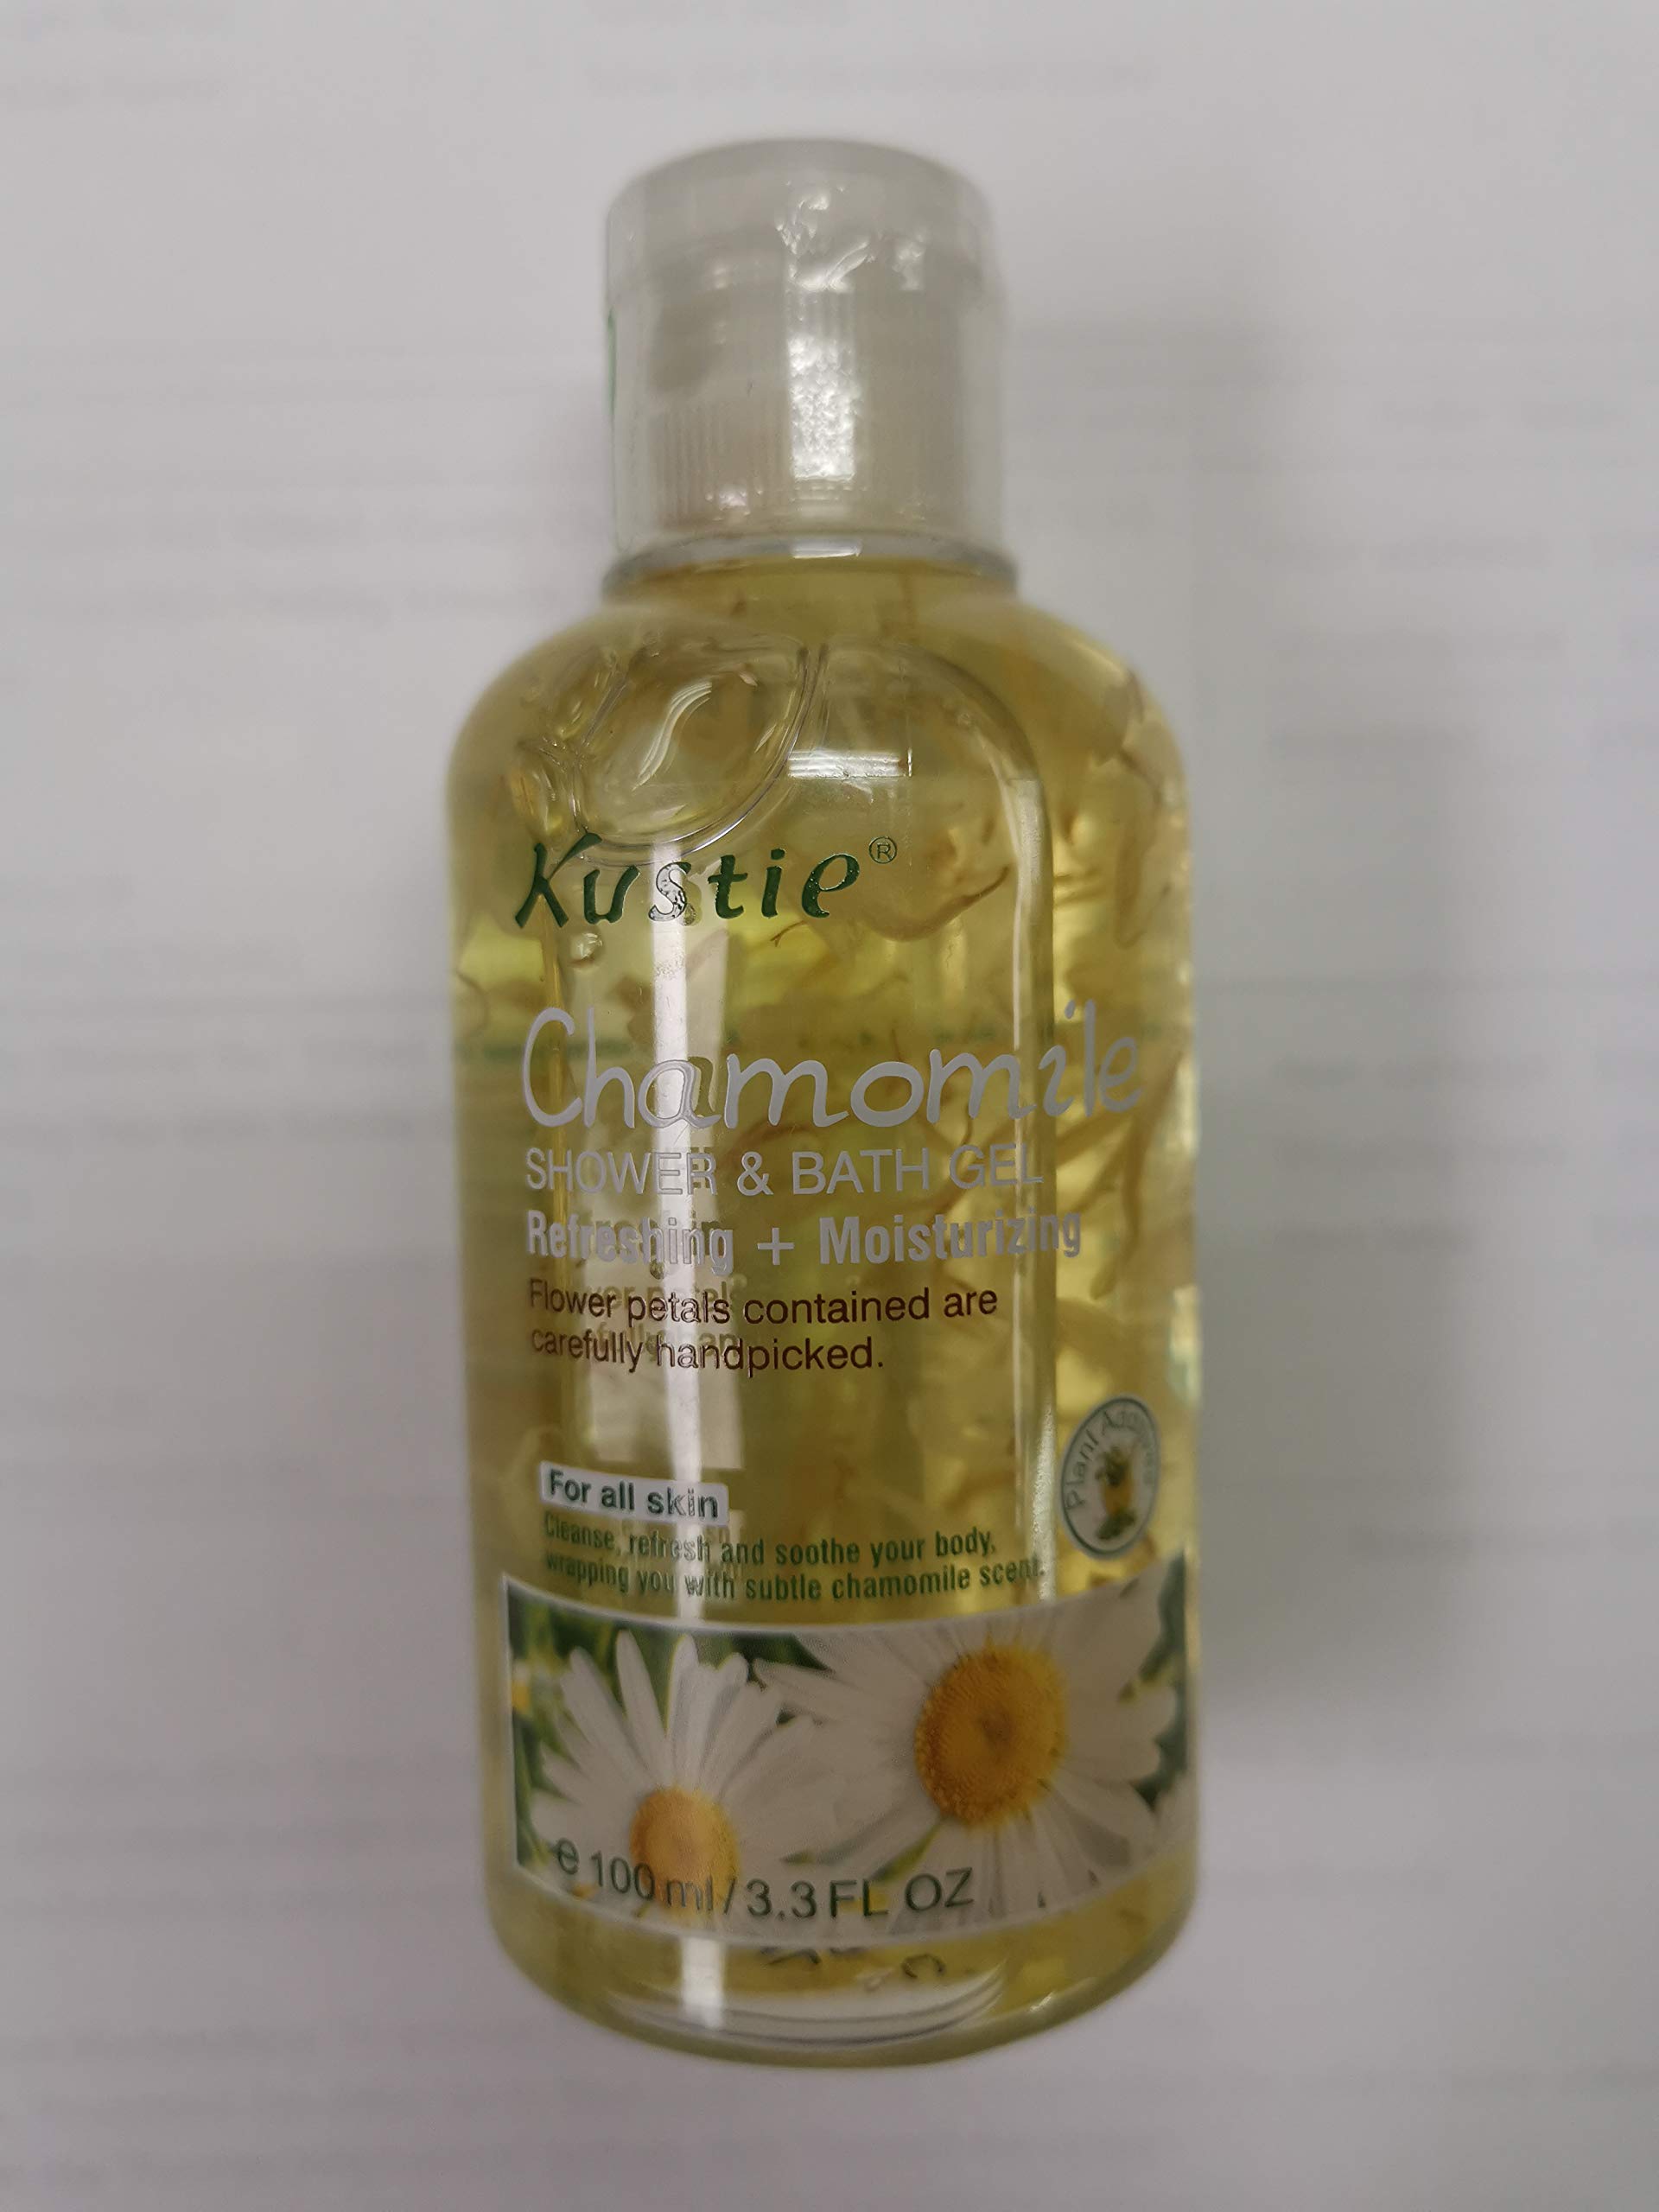 KUSTIE Chamomile Shower Gel 500ml - Refresh and Soothe Your Body, Wrapping You with Subtle Chamomile Scent